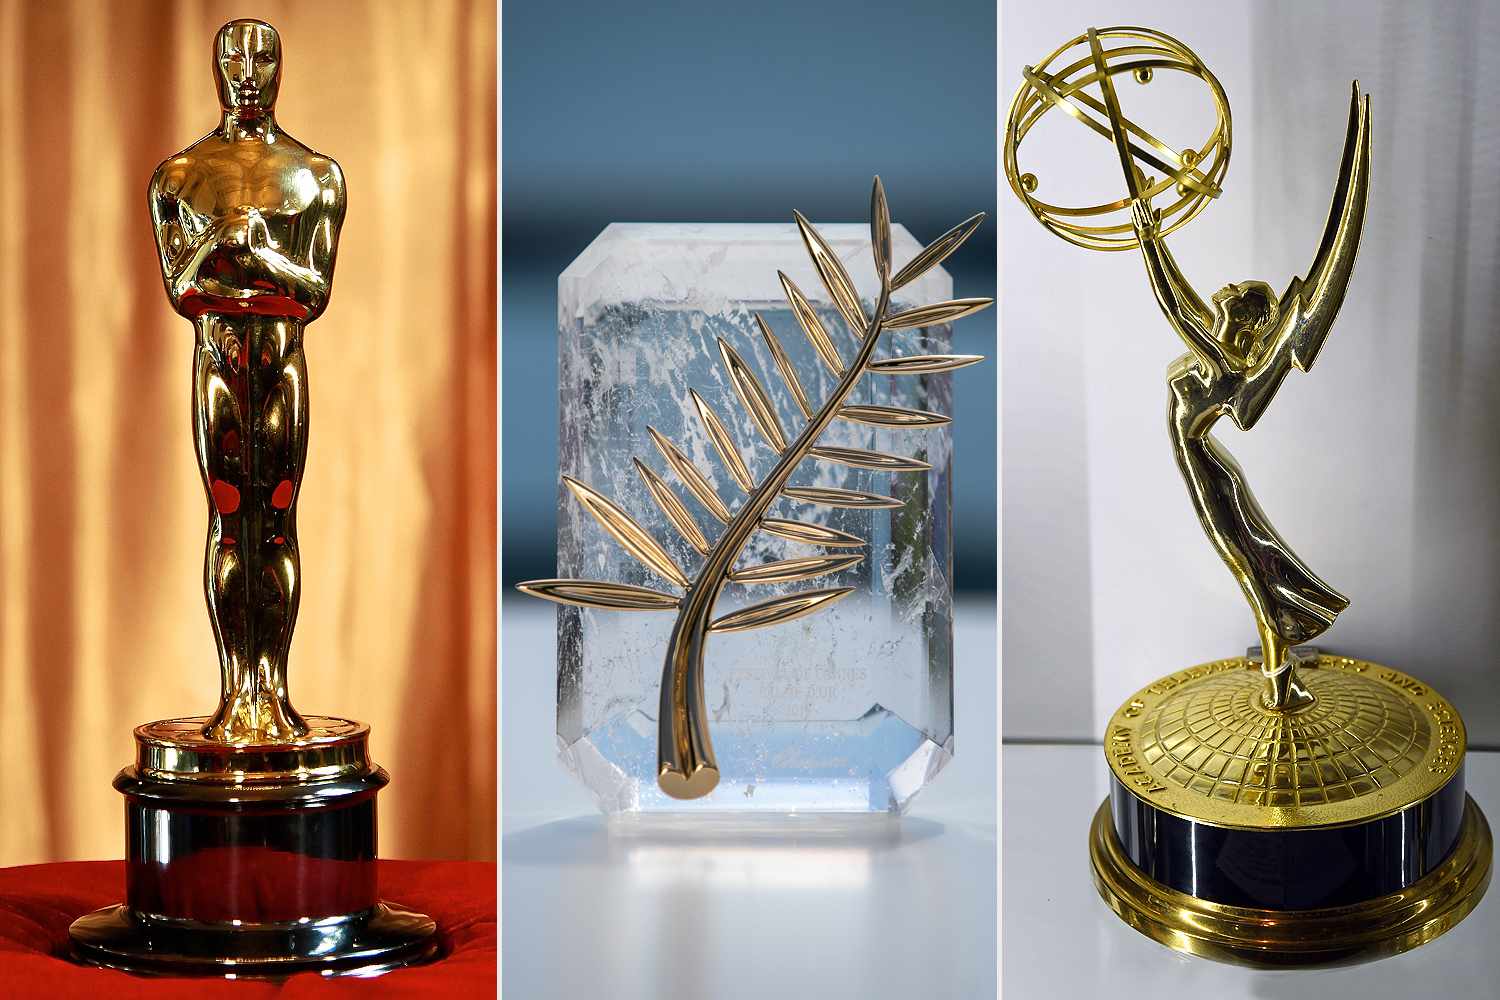 Oscars statuette, Emmy statuette, and the Cannes Palme d'Or